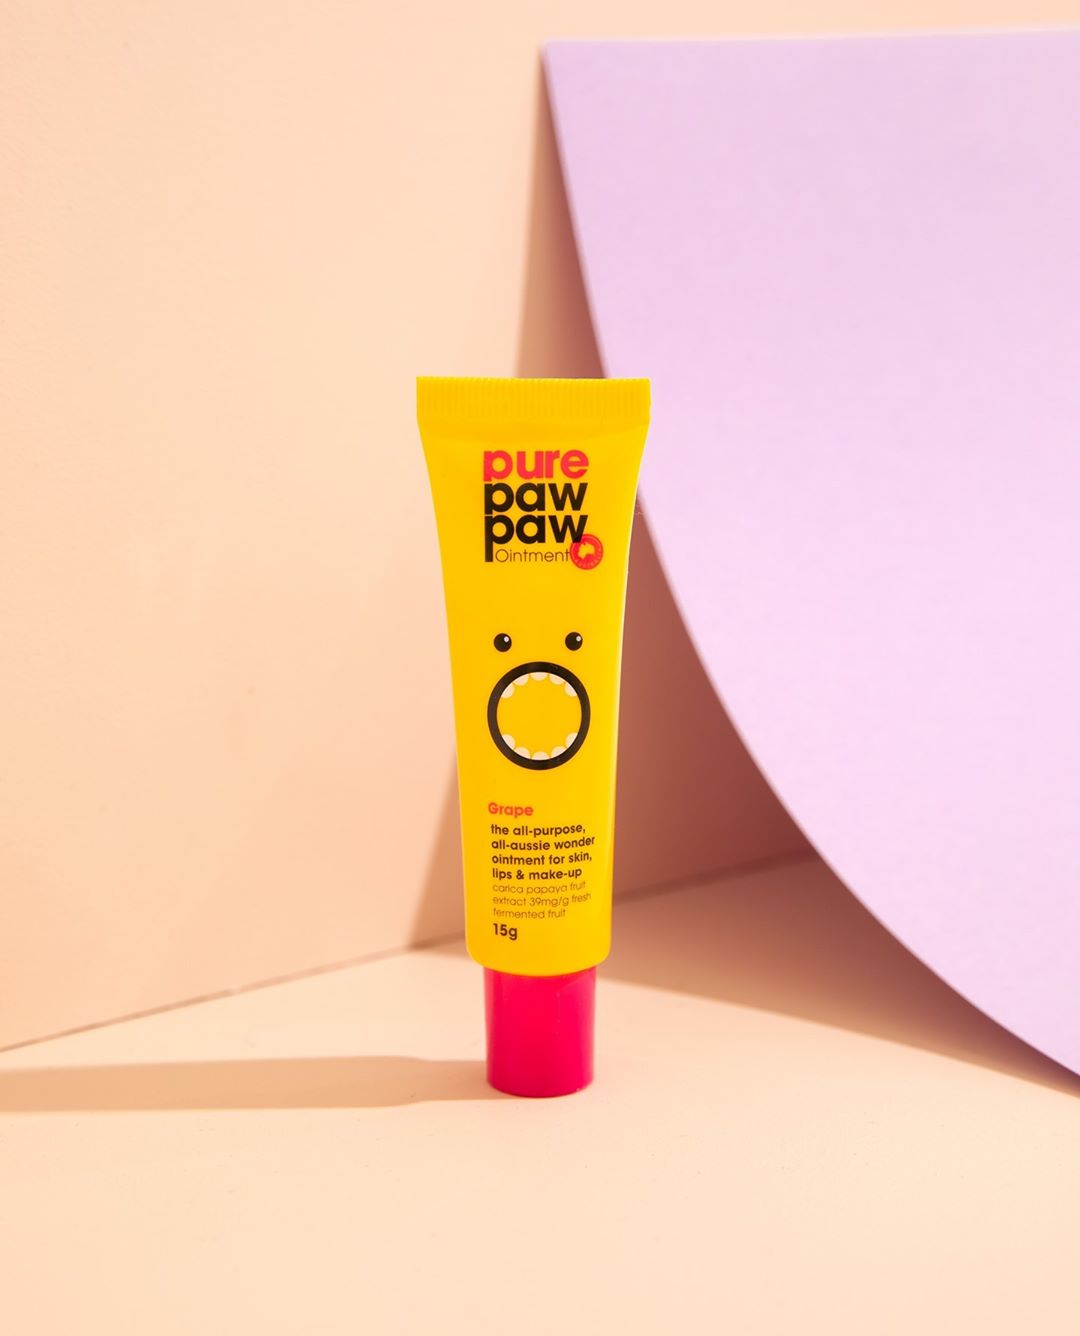 Pure Paw Paw - I may be small - But i can do BIG things. ⁠
Like, 100 things, dry lips, dry cuticles, skin rash, minor cuts, crazy eybrows?? - Yep, got them too. 😎